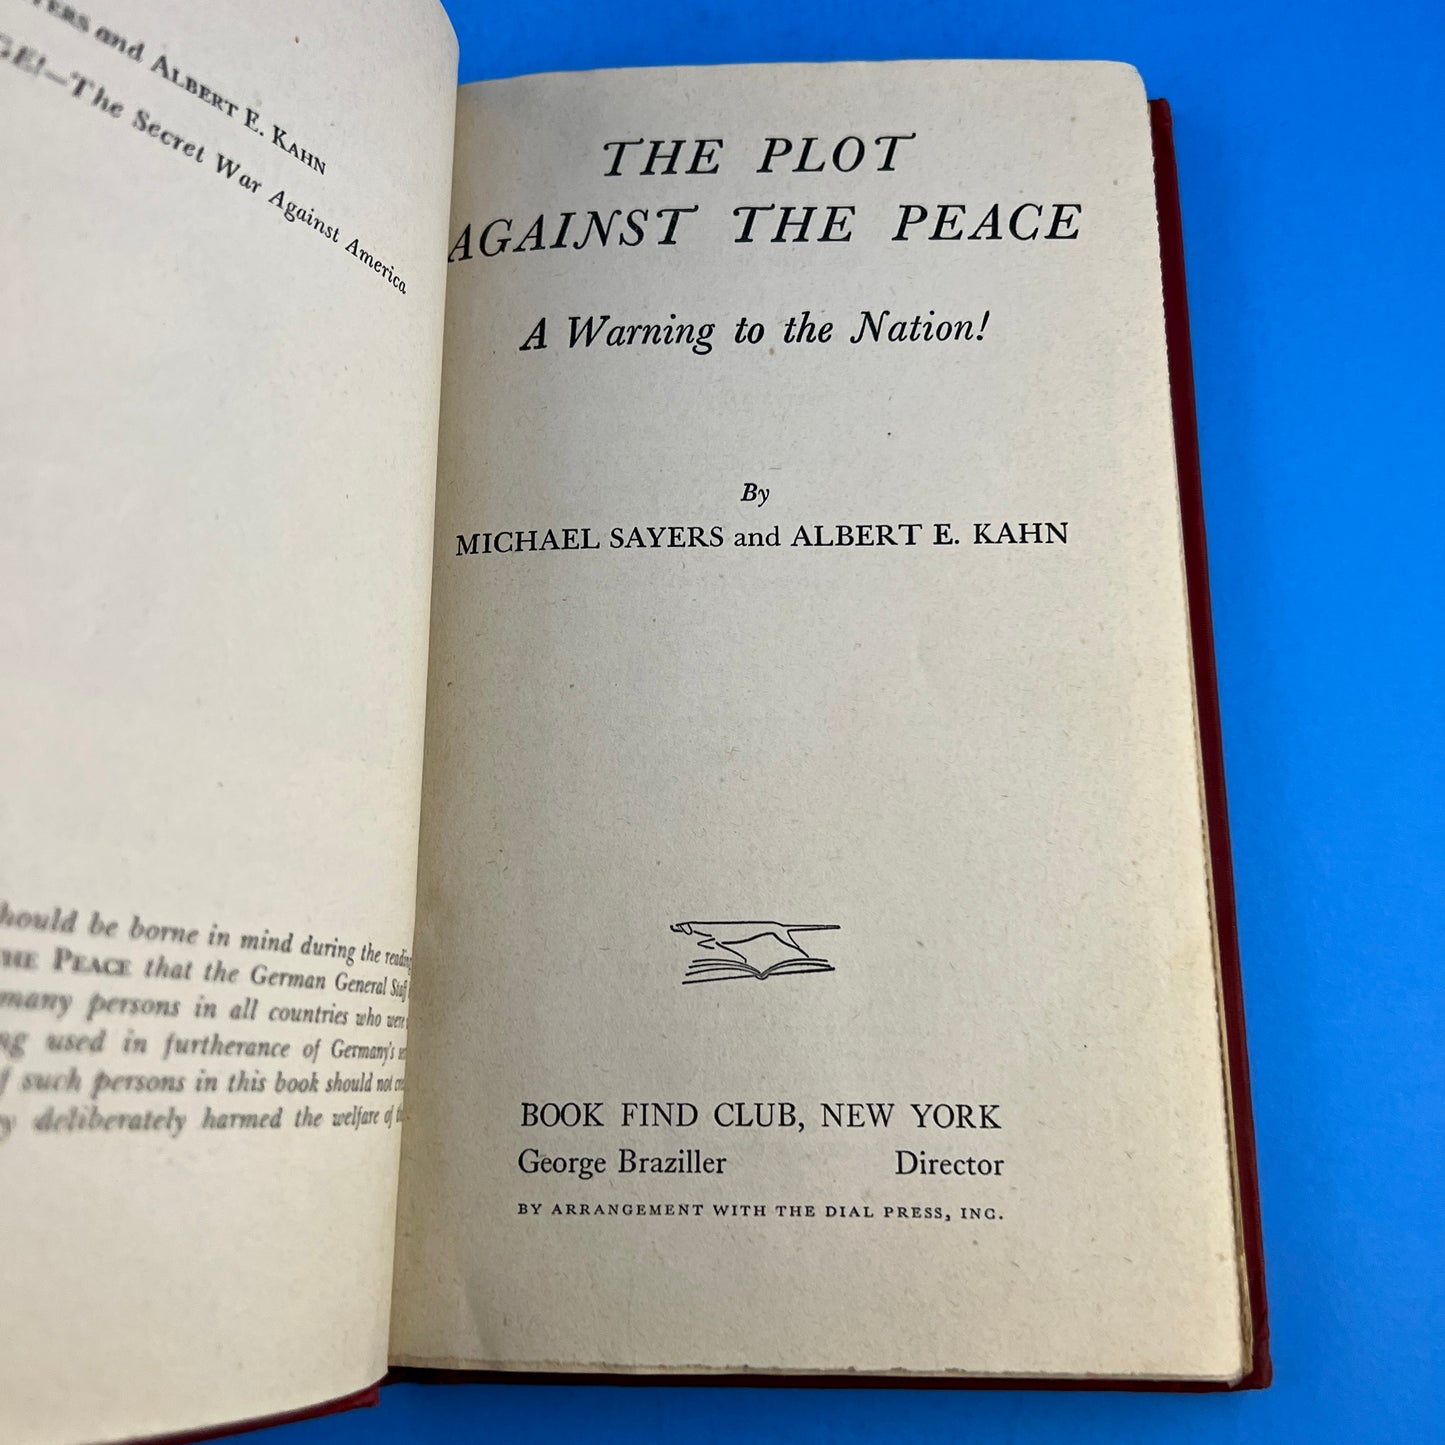 The Plot Against The Peace: A Warning to the Nation!